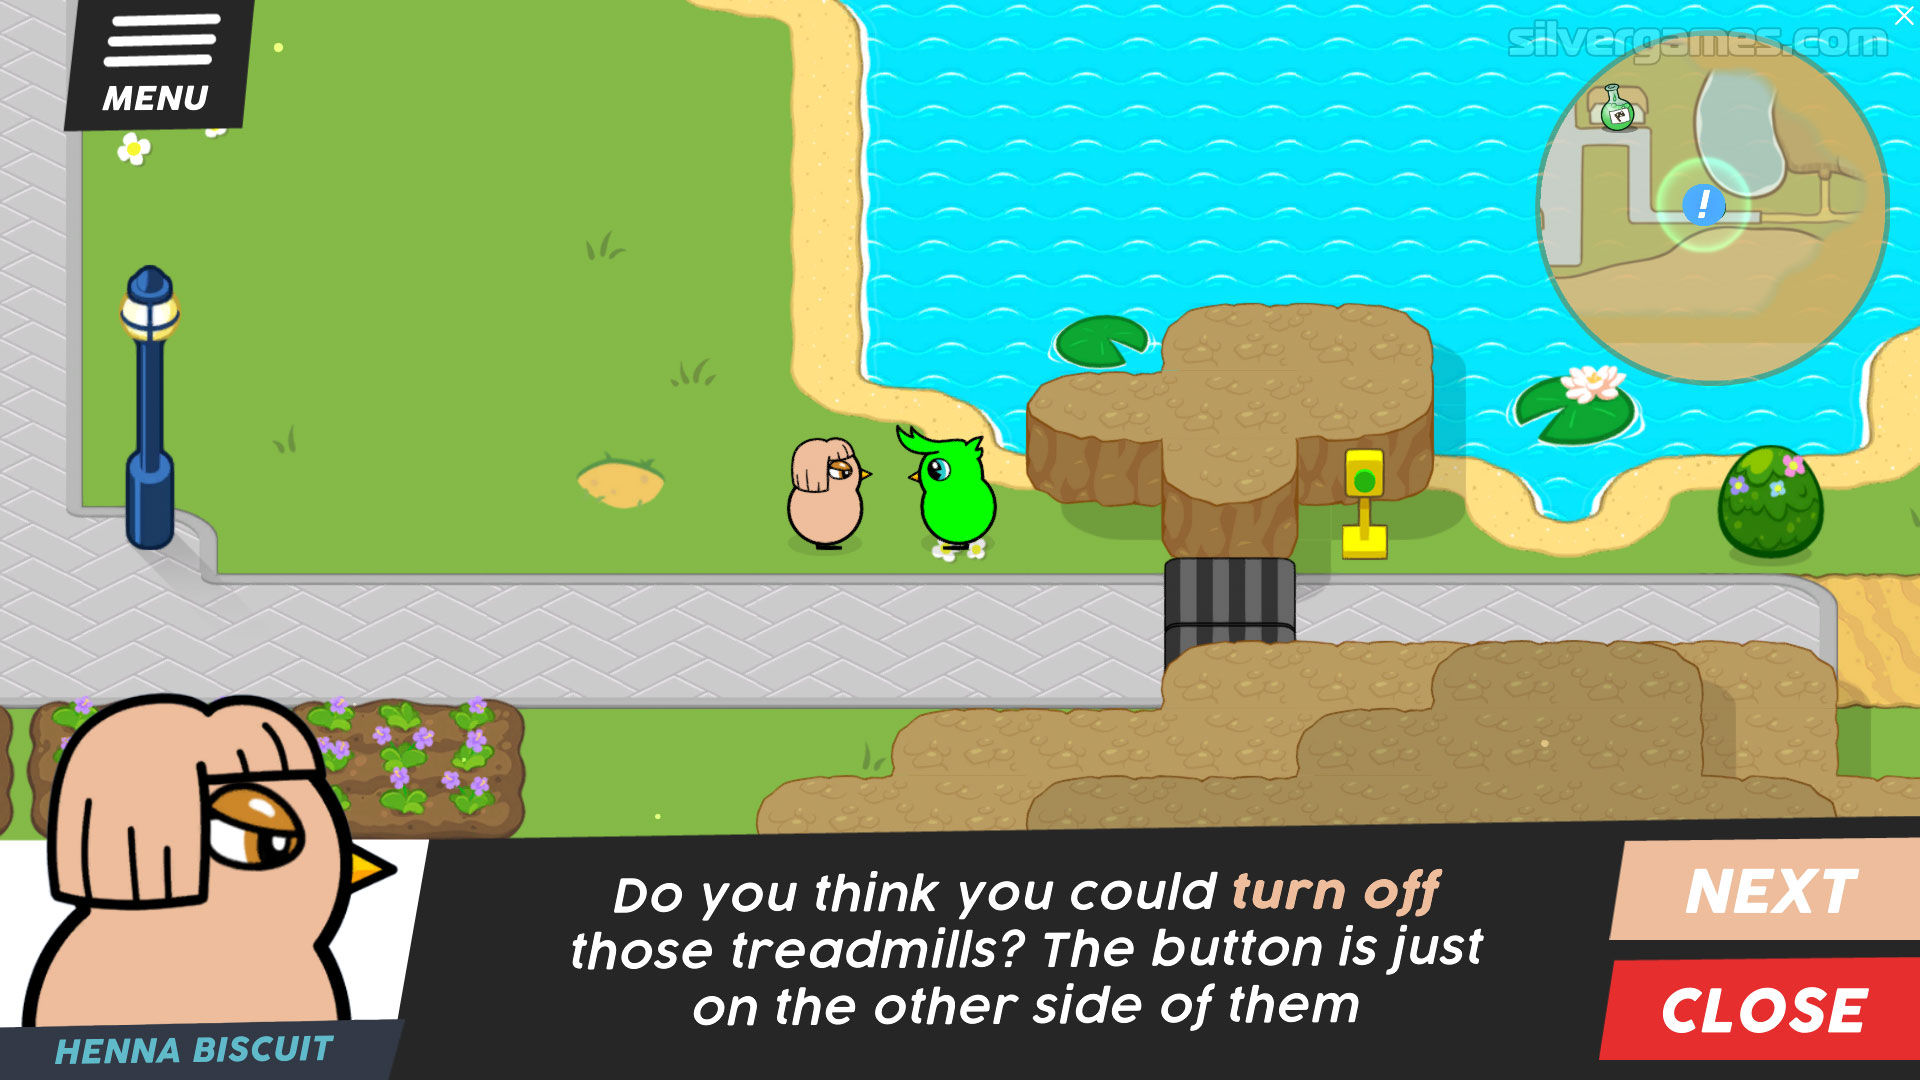 Duck Life Adventure - Play Game Online